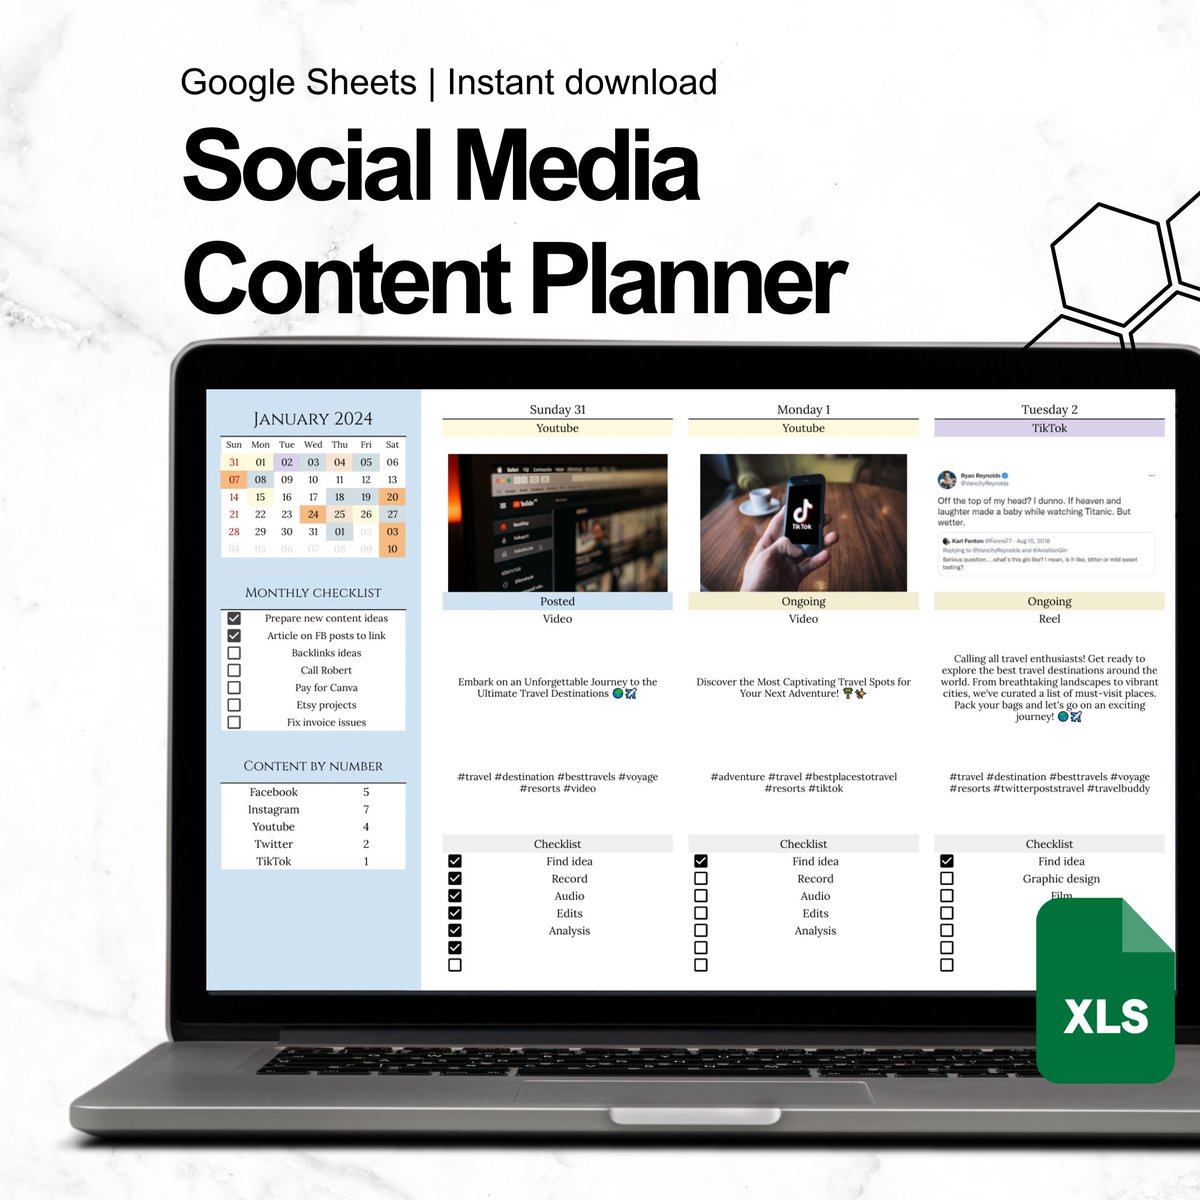 Social Media Planner with Calendar, Daily Content Planning, Monthly Content Creation Tracker Template for Google Spreadsheet etsy.me/4978jRC via @Etsy 

#contentplanner #socialmediaplanning #digitaldownload #etsyplanner #exceltemplate #instagramplanner #socialmediaguru